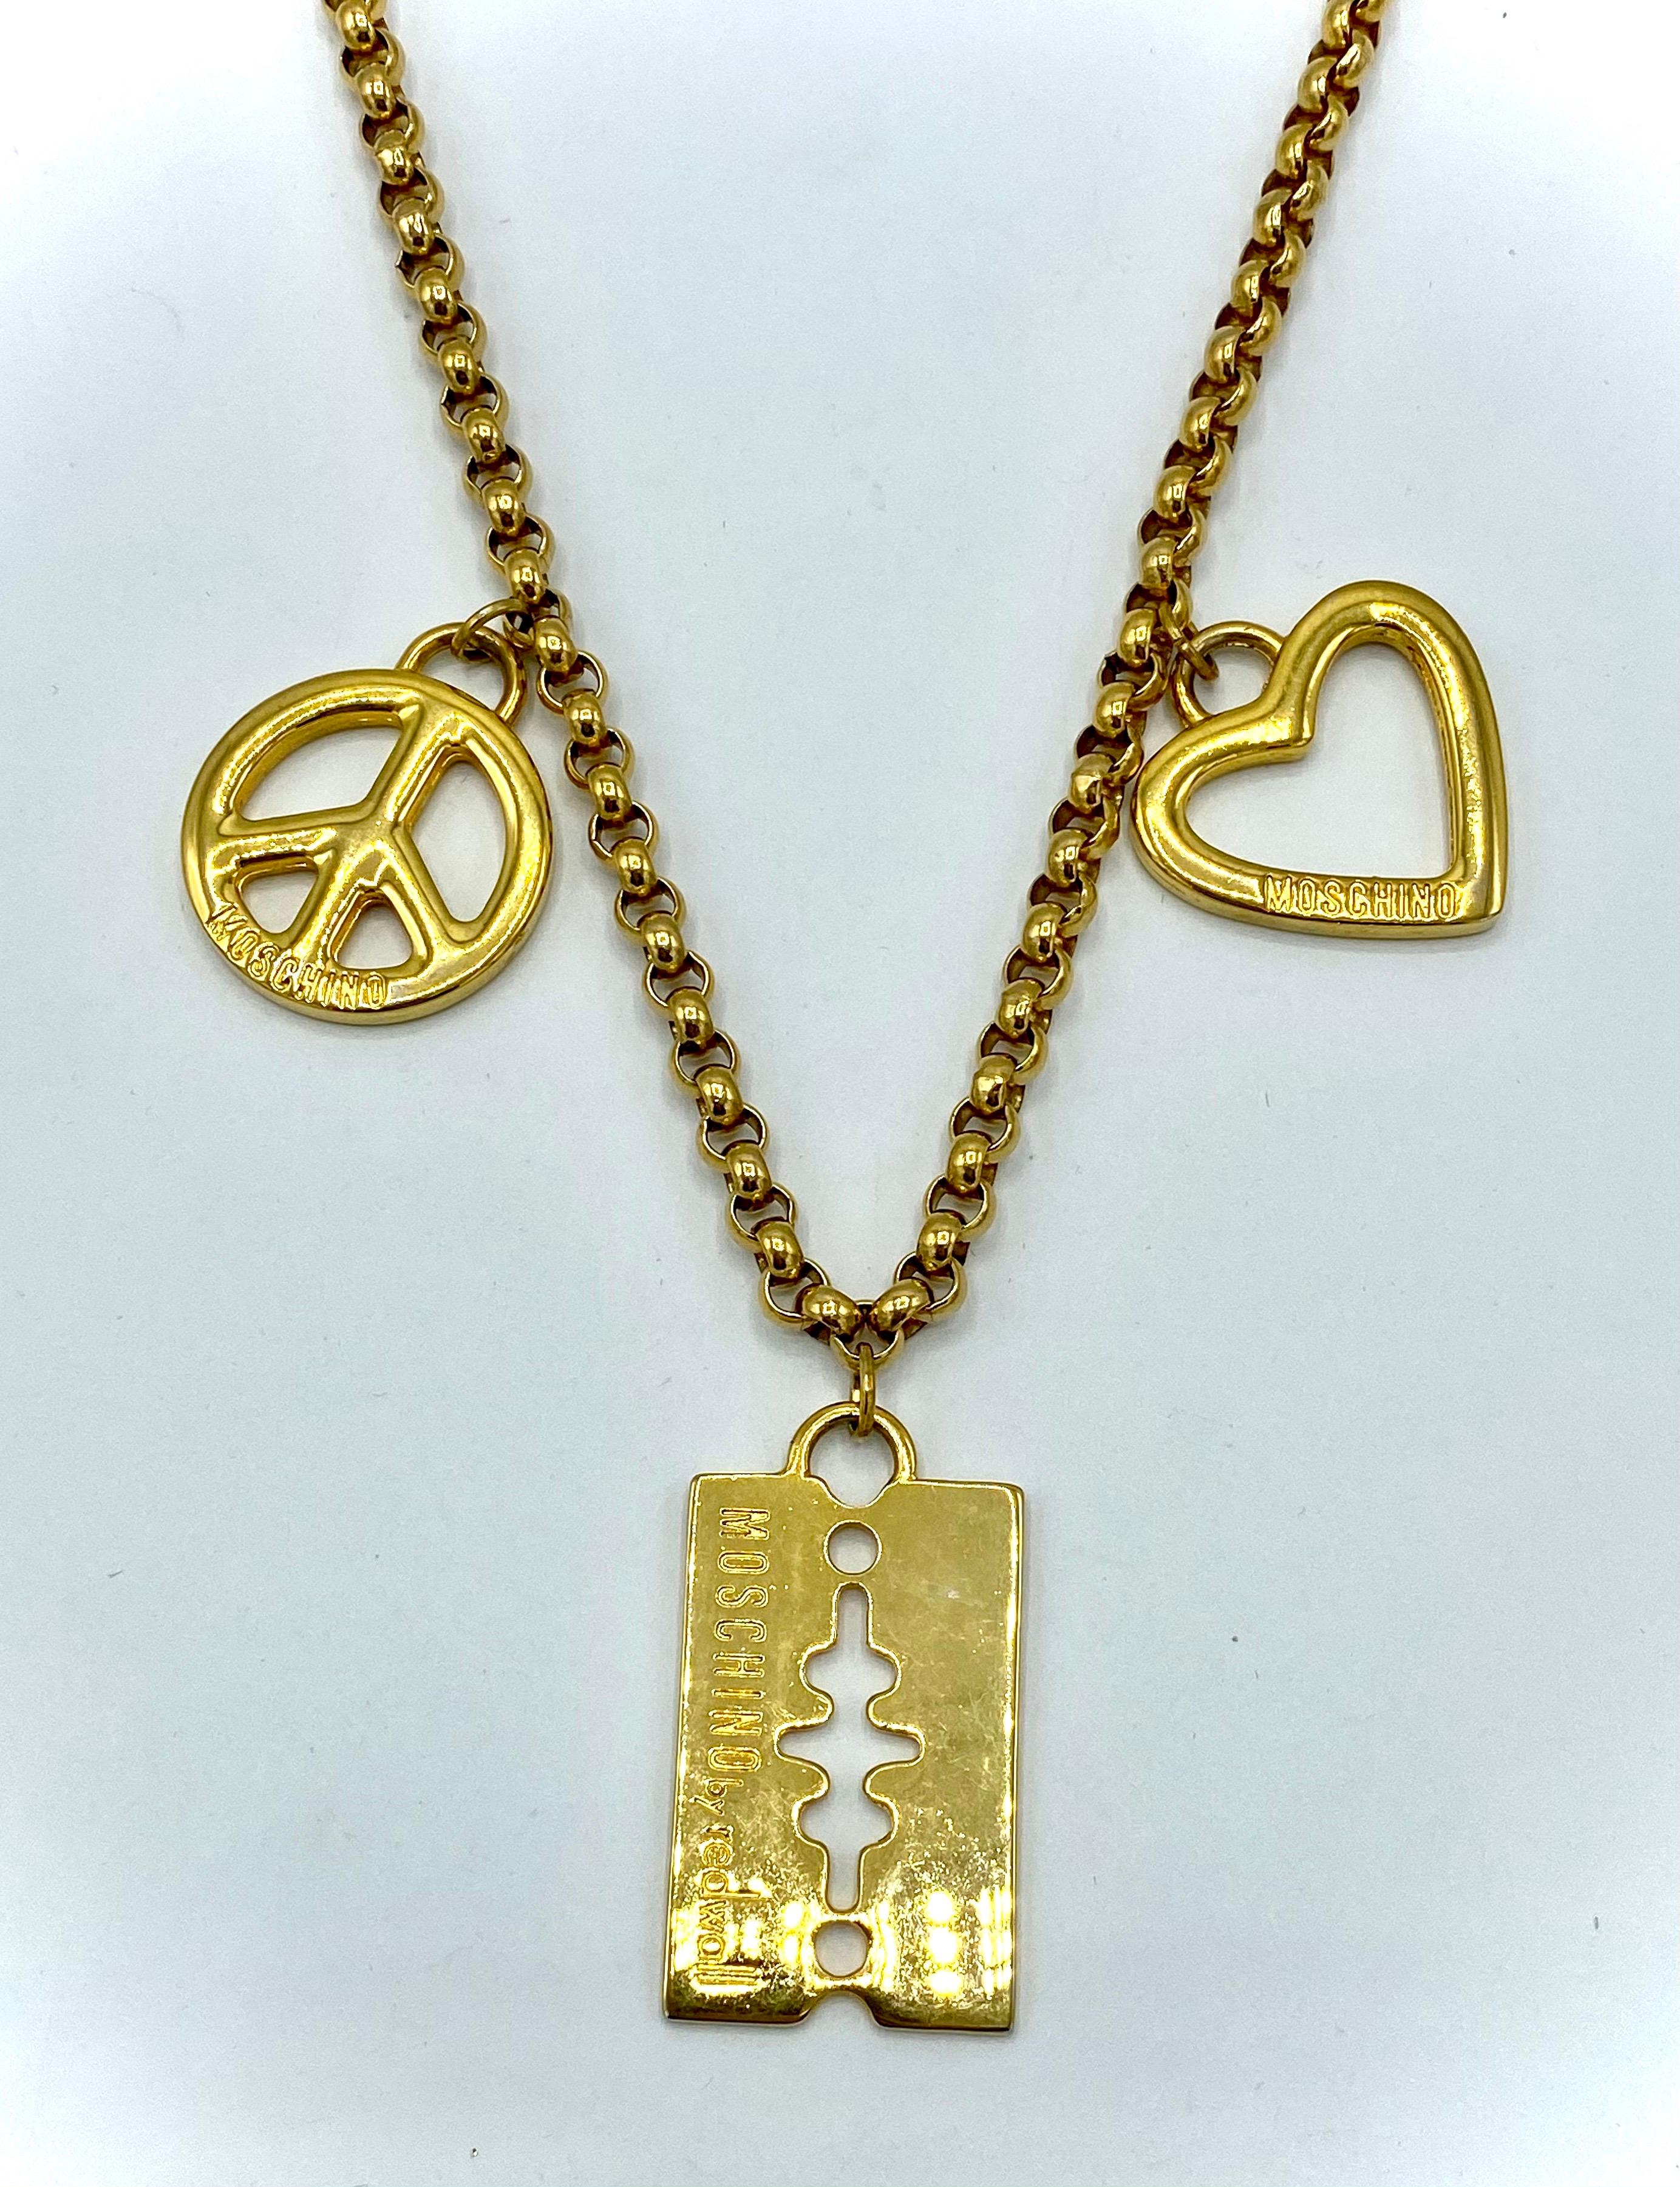 Chic Moschino by Redwall charm necklace from the 1990s. Gold plate chain and charms and made in Italy. The chain is a Belcher style and measures .25 of an inch in diameter. The necklace is 24 inches long including the claw clasp. Each charm is